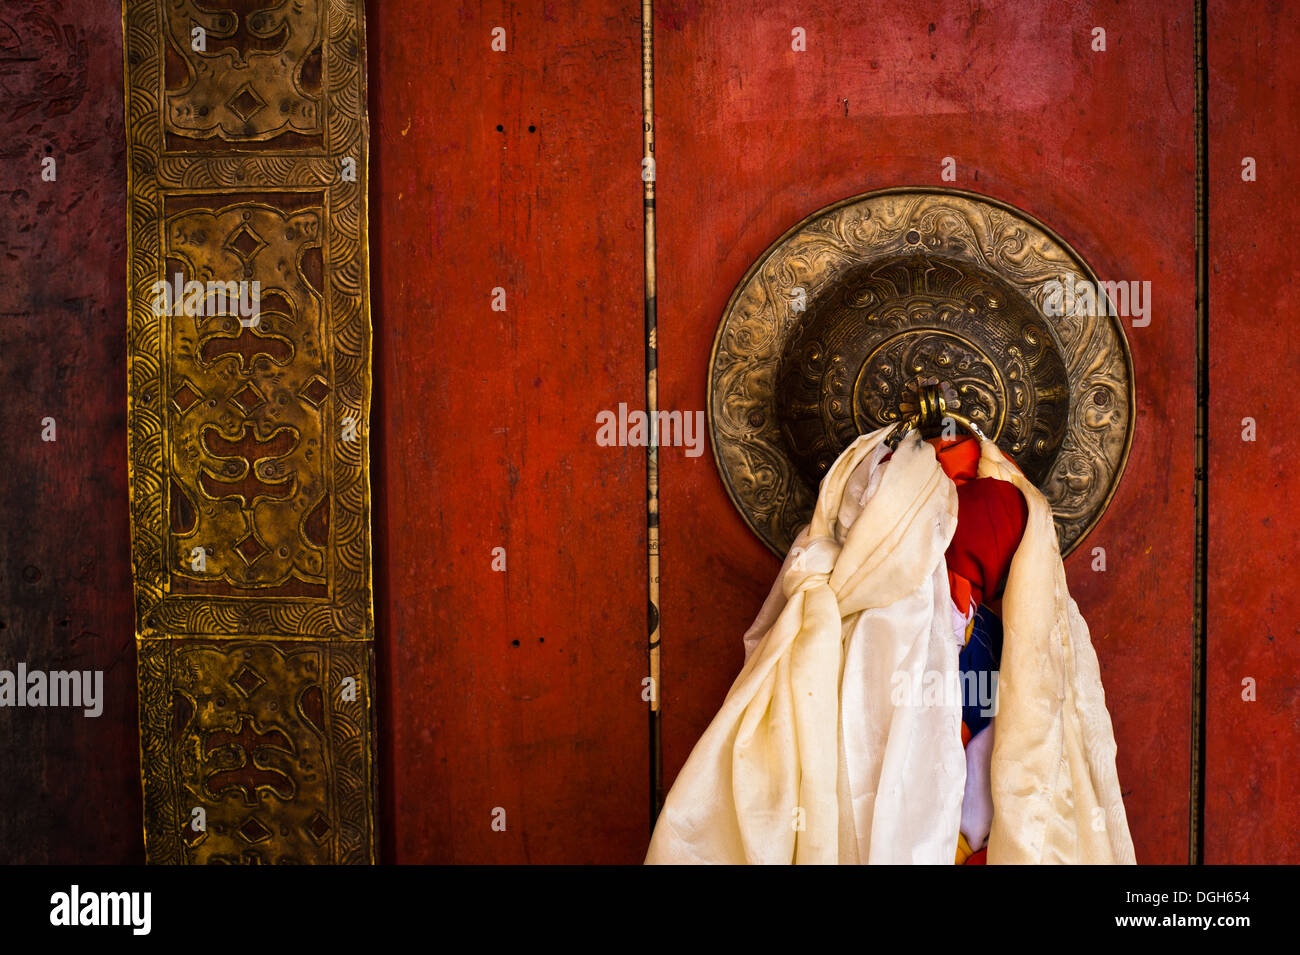 Old door at Buddhist monastery temple decorated with ancient doorknob and tassel. India, Ladakh, Diskit monastery Stock Photo